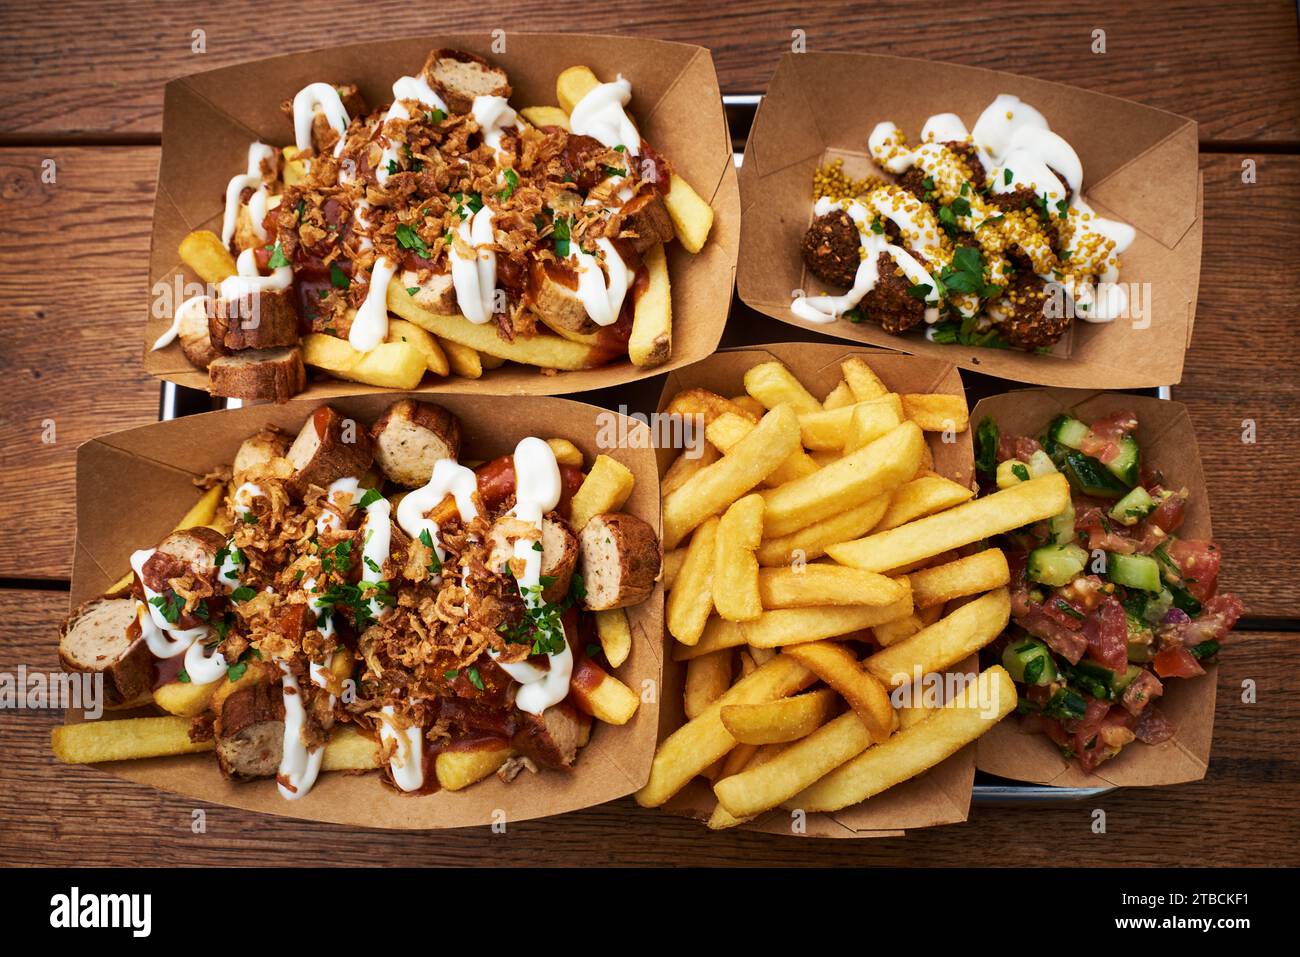 Top view of traditional dish kurry korv and falafel or typical German curry wurst with falafel served on a wooden table and paper plates Stock Photo